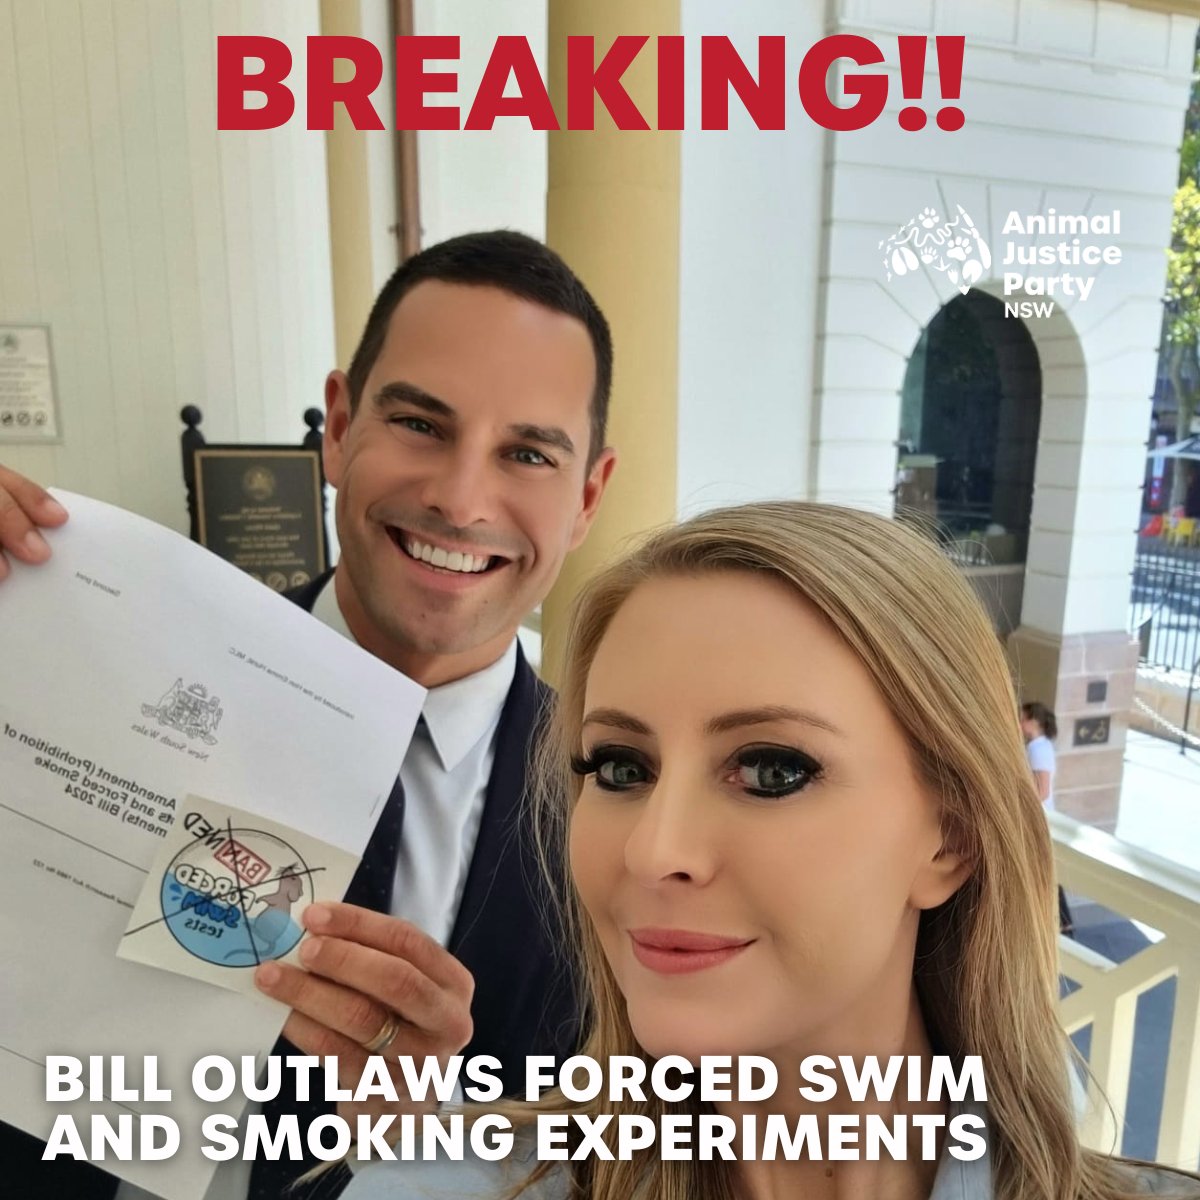 Yesterday in the NSW Parliament our Animal Justice Party Bill that outlaws forced swim and smoking tests PASSED the Lower House!! This is a historic moment for animals and the Animal Justice Party. Thank you to our MP Emma Hurst for making this world-first legislation a reality.